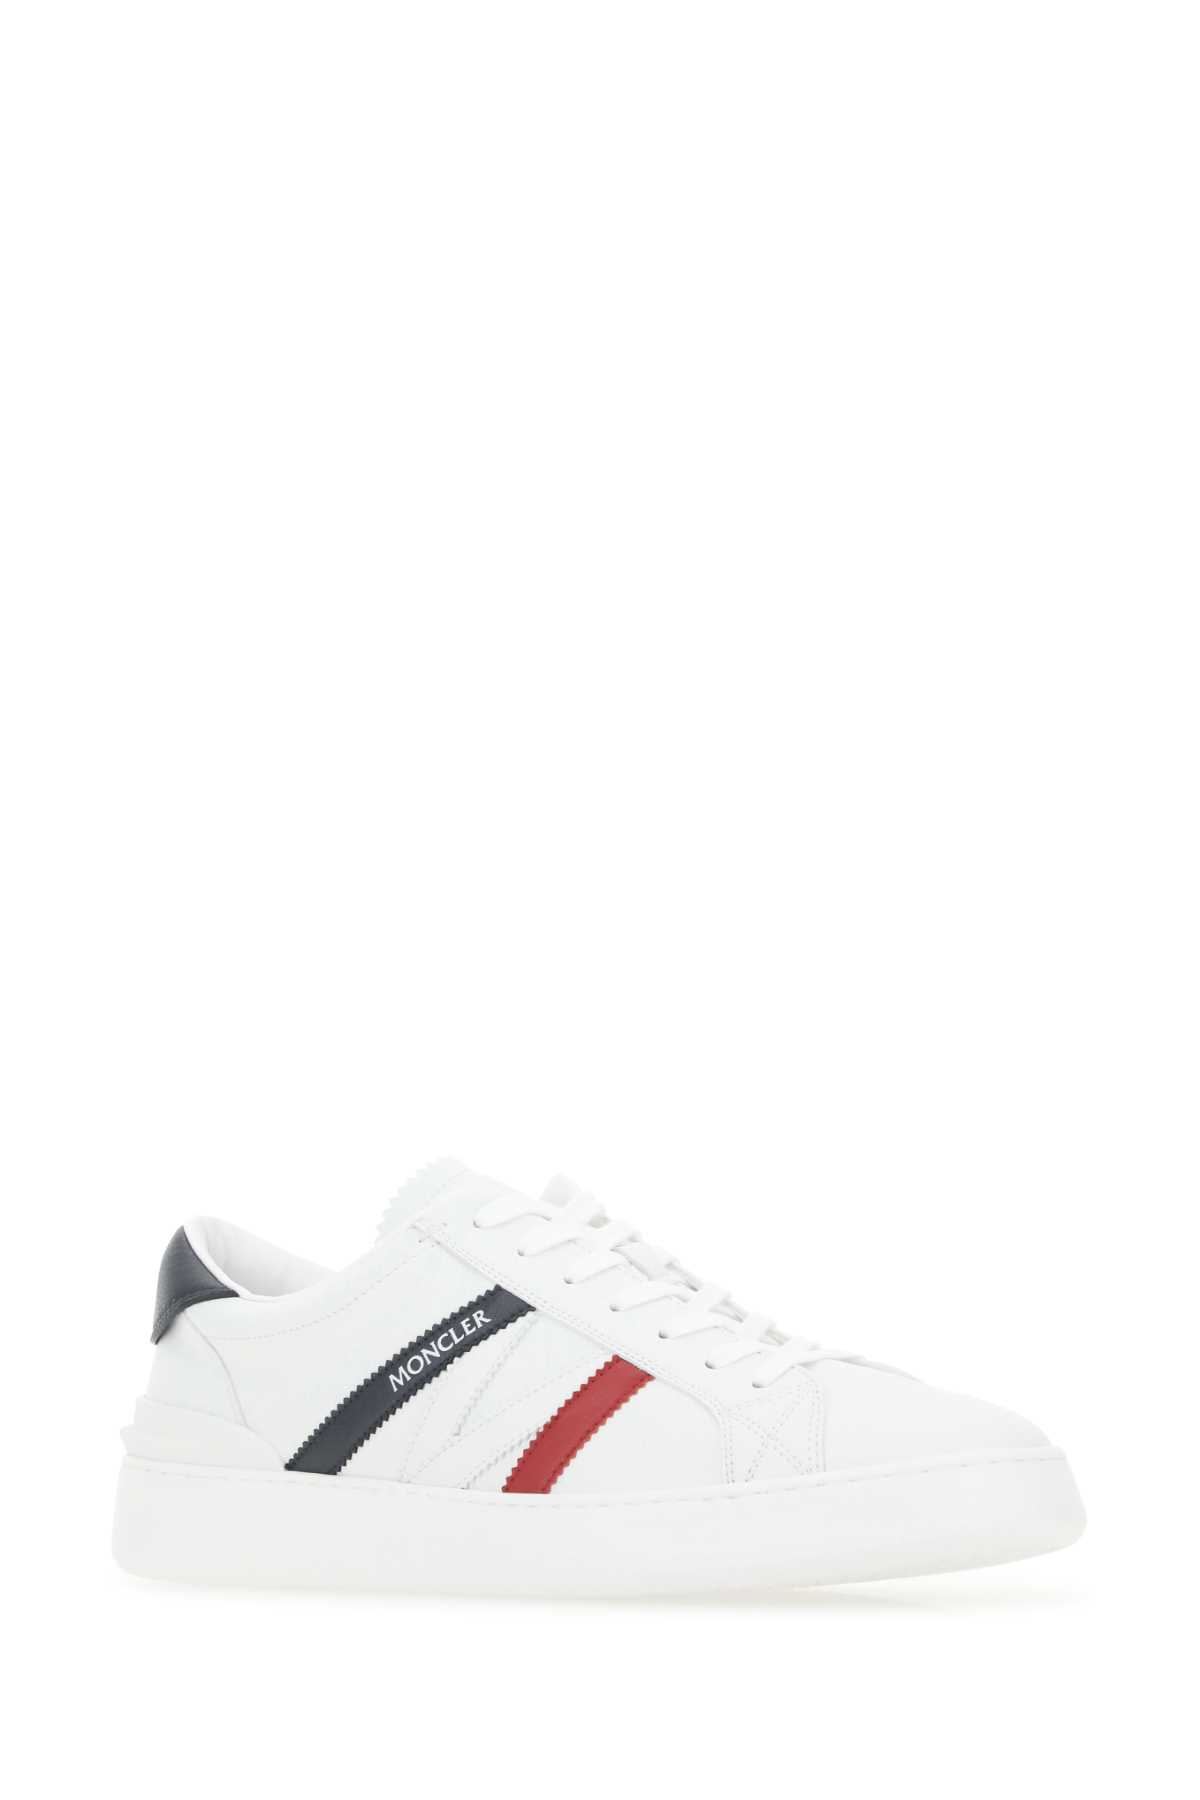 Moncler White Leather Monaco M Trainers